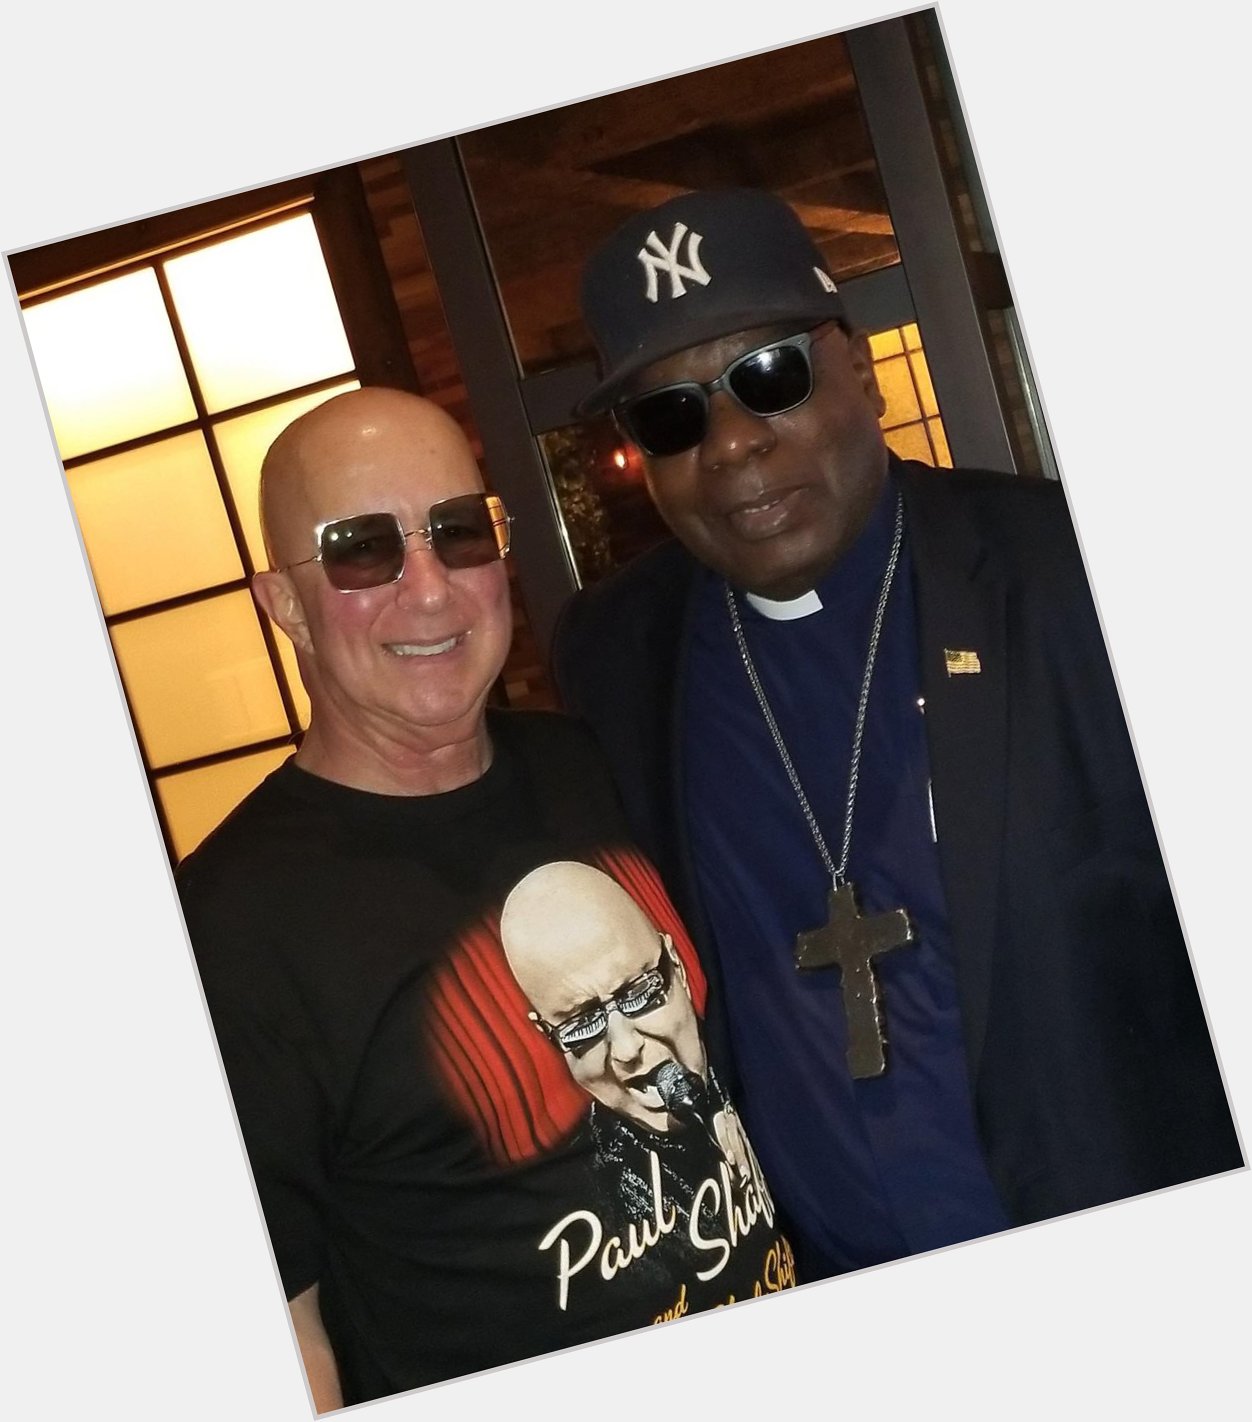 Joining Paul Shaffer Fans Everywhere Wishing you a very Happy Birthday Love you Paul           